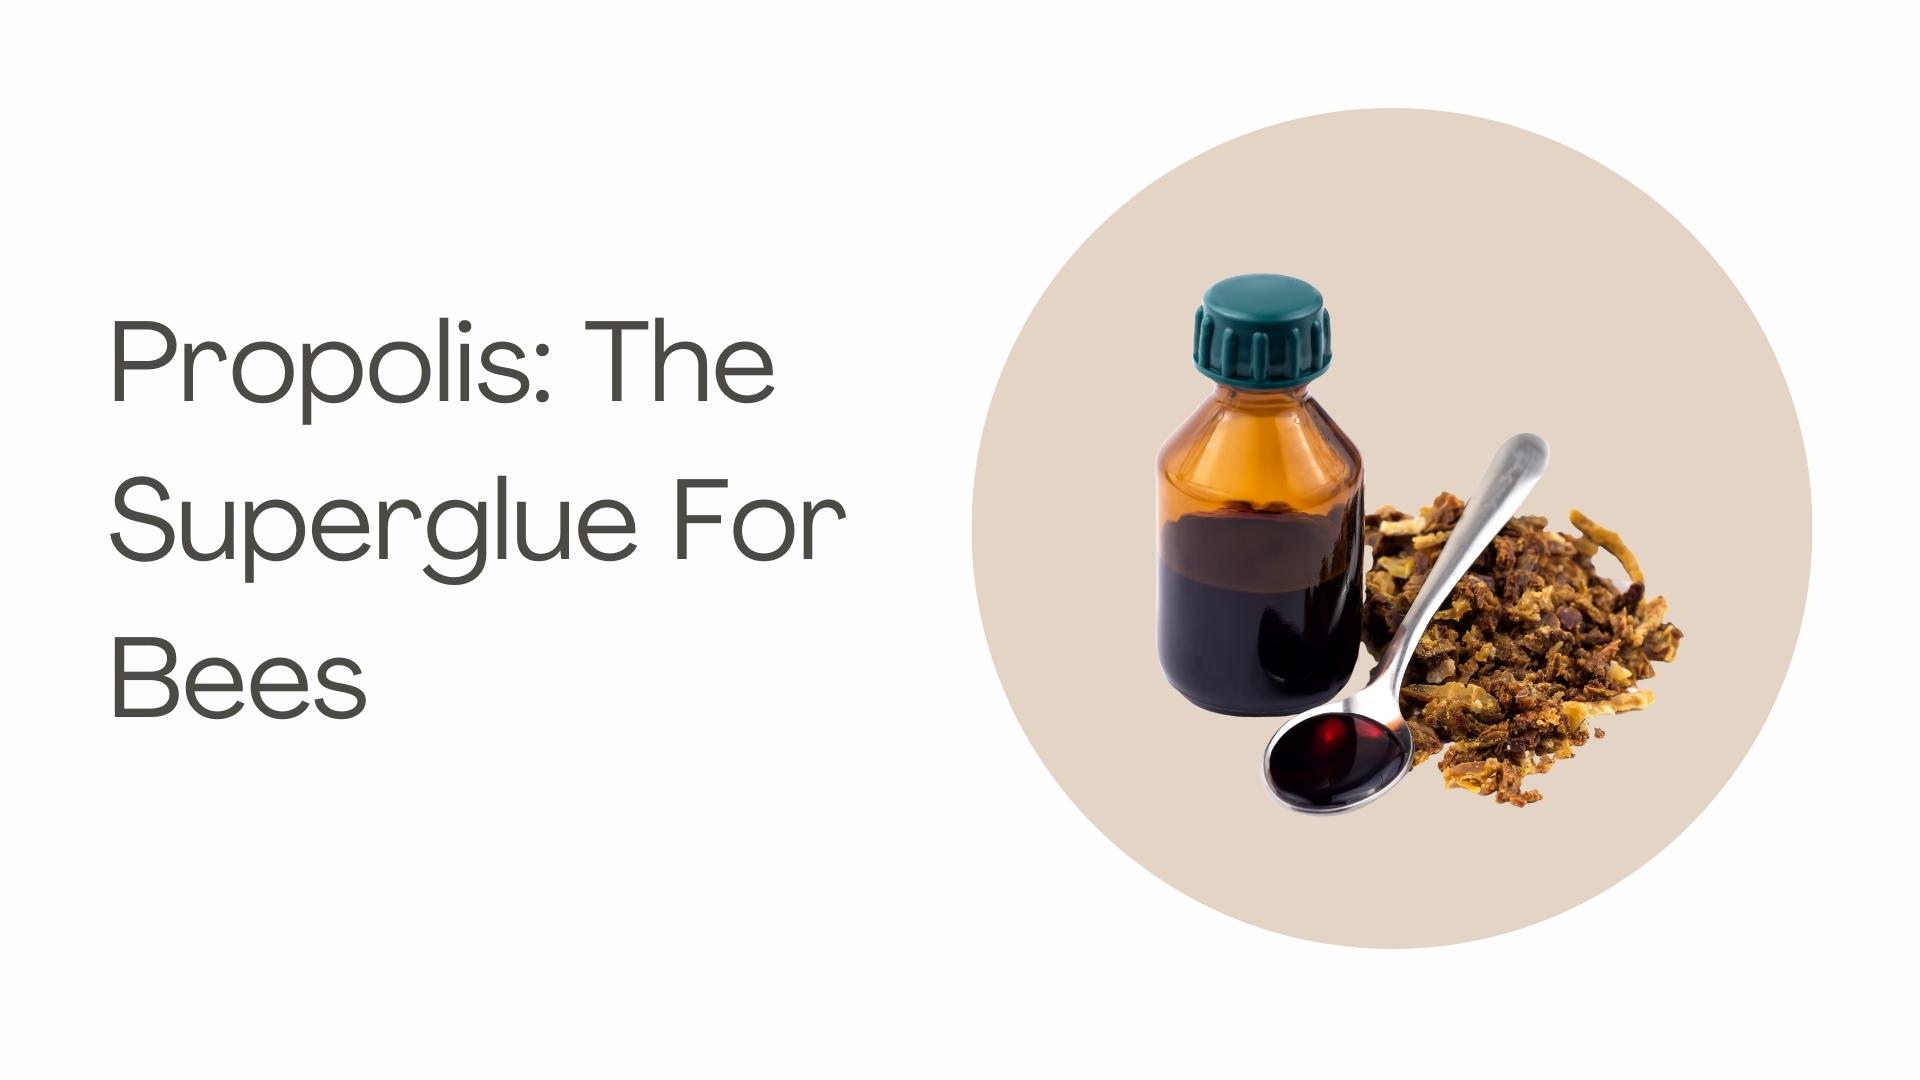 Propolis: The Superglue For Bees